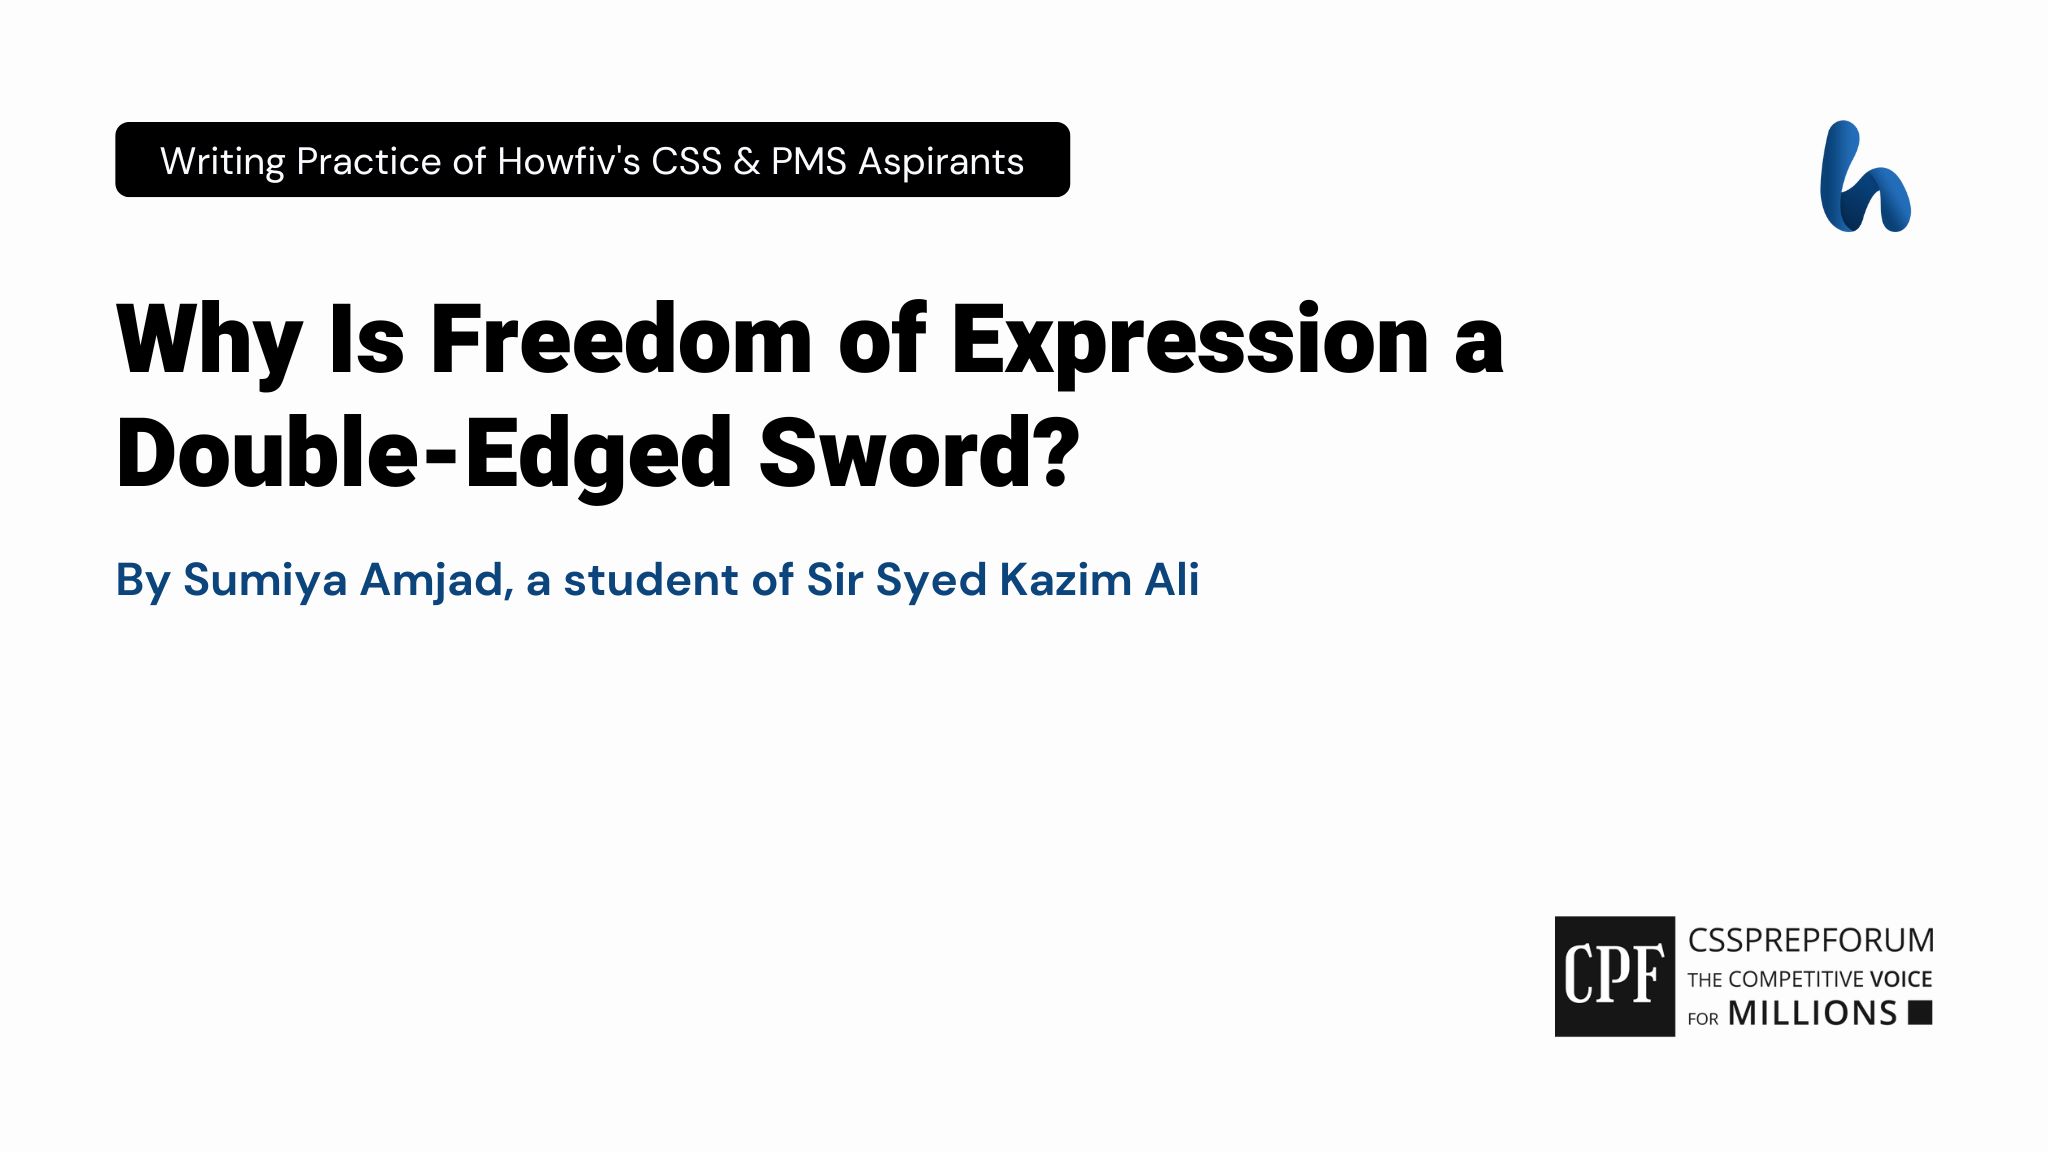 Freedom of Expression as Double-edged Sword | CSS article is written by Sumiya Amjad, a student of Sir Syed Kazim Ali...